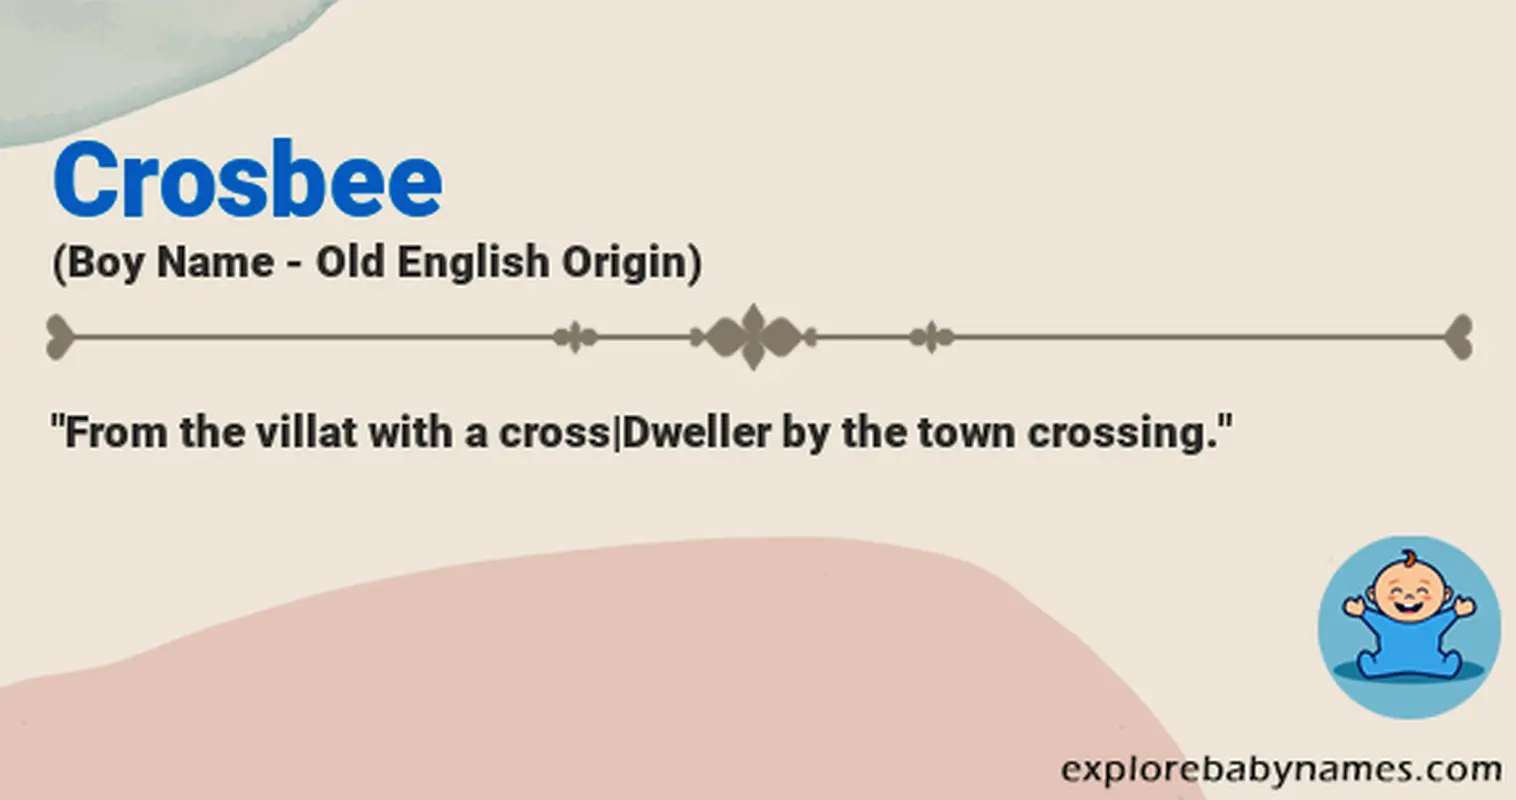 Meaning of Crosbee